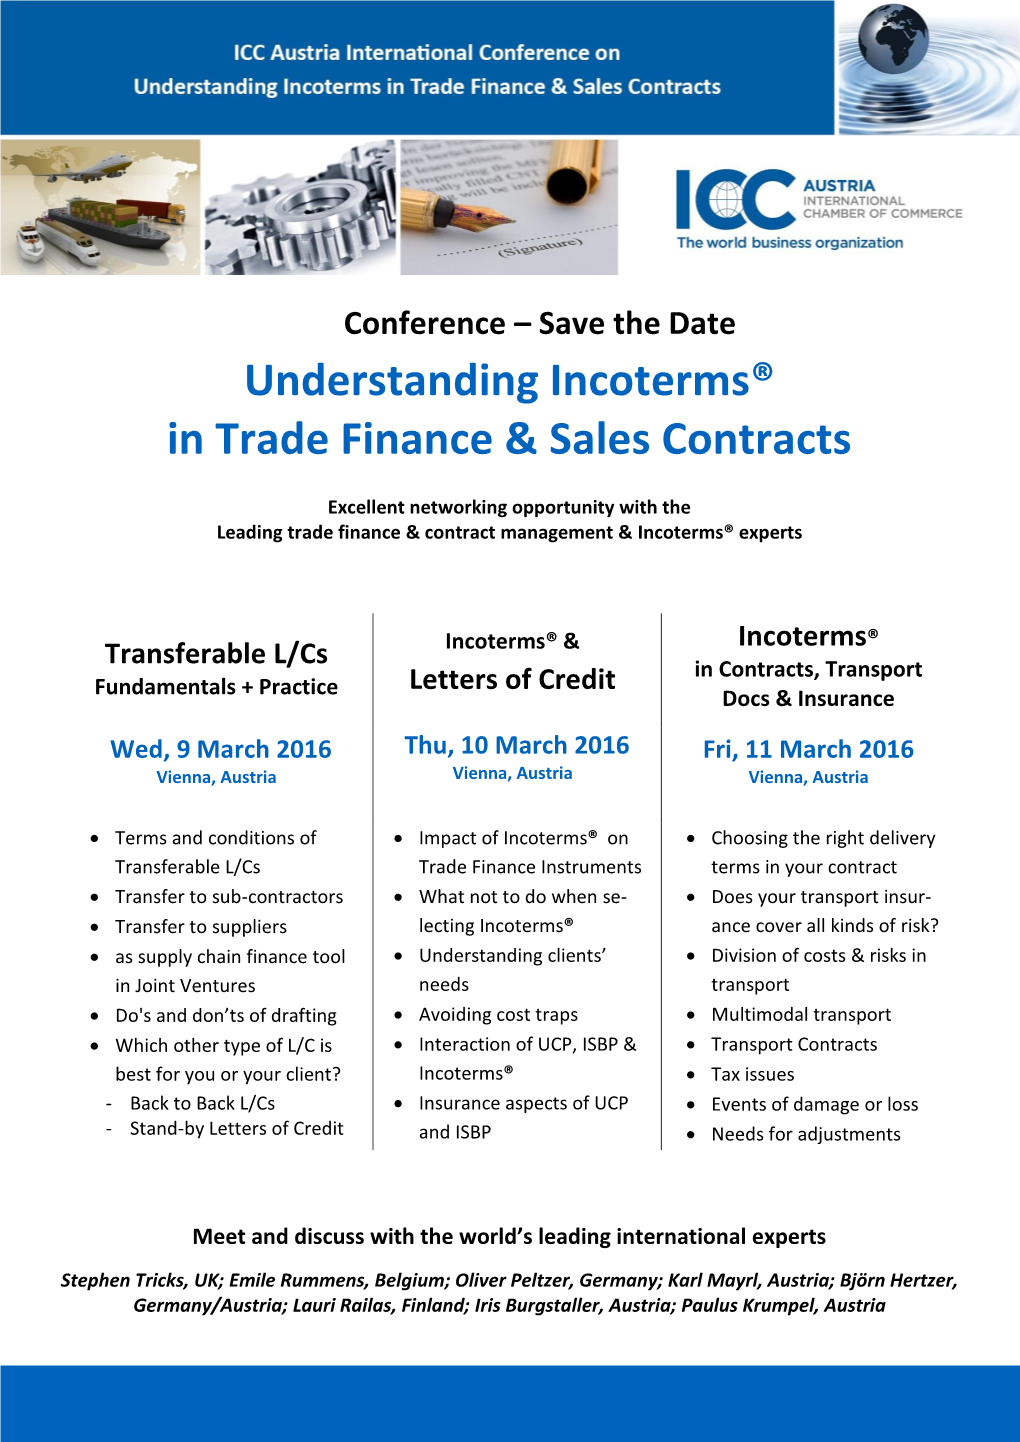 Understanding Incoterms® in Trade Finance & Sales Contracts